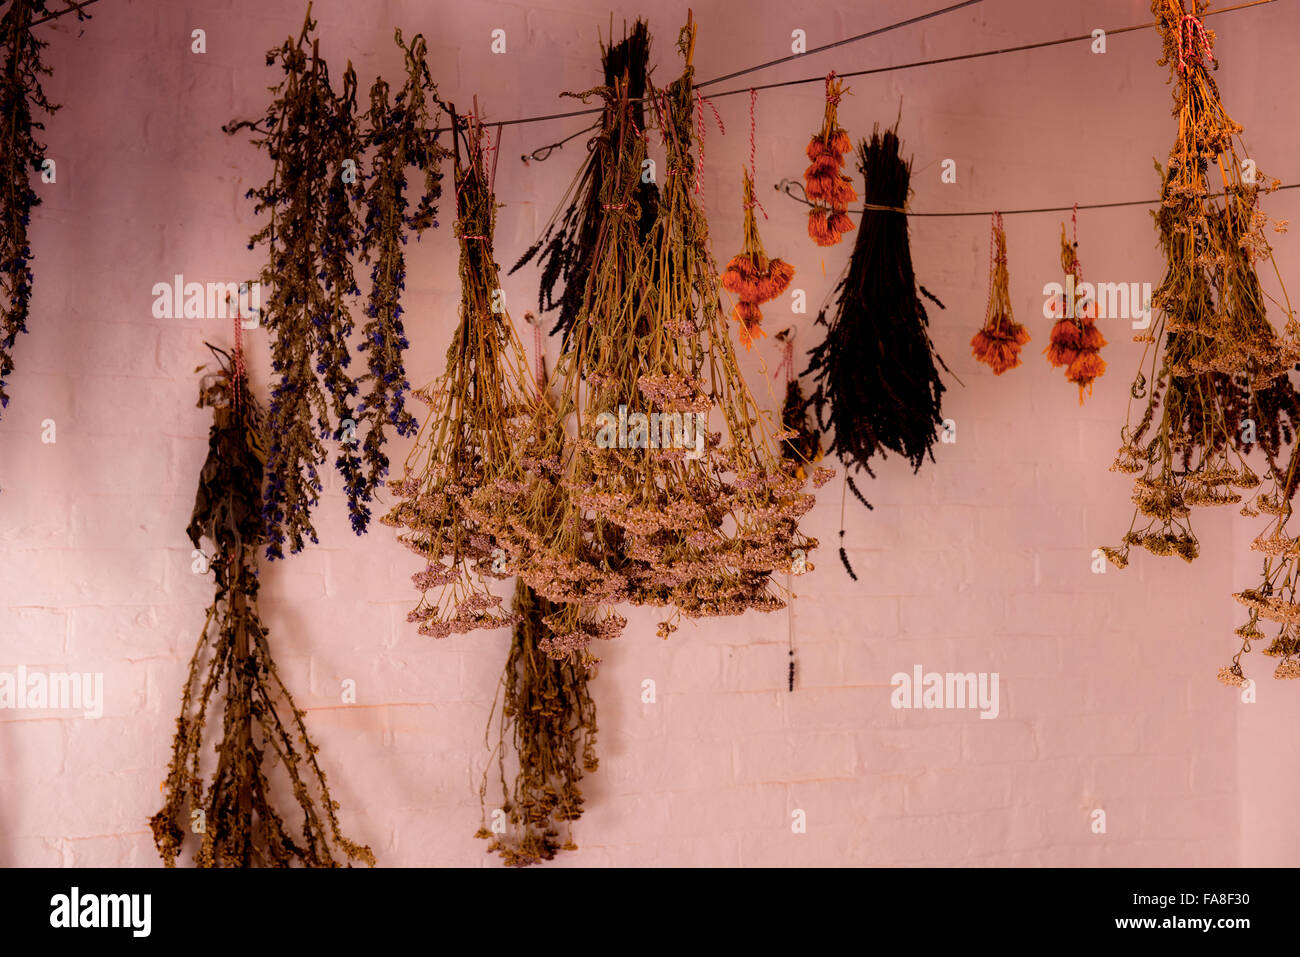 Bunches of dried flowers hanging upside down during the process of drying flowers. Stock Photo